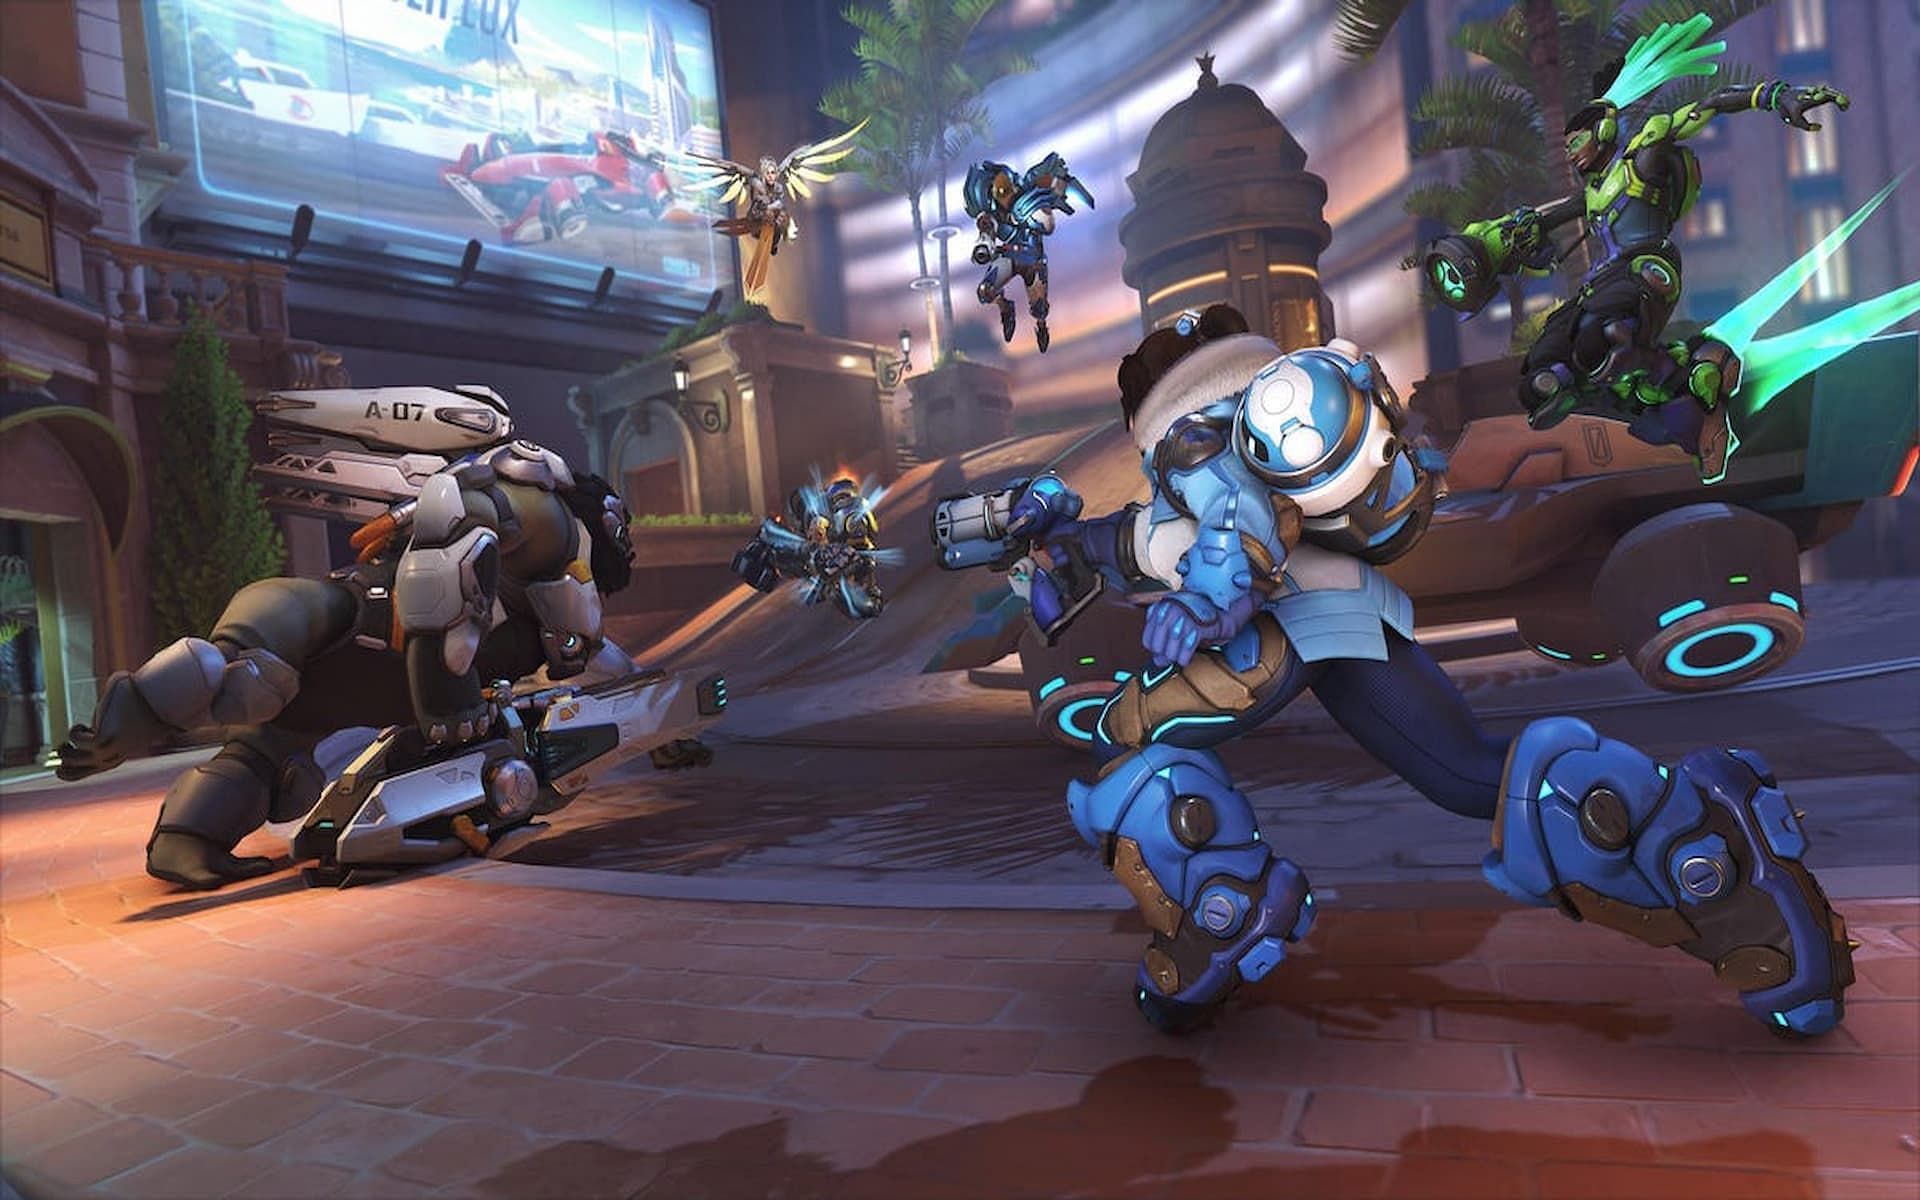 Overwatch 2 will include new maps, heroes, and features (Image via Blizzard Entertainment)